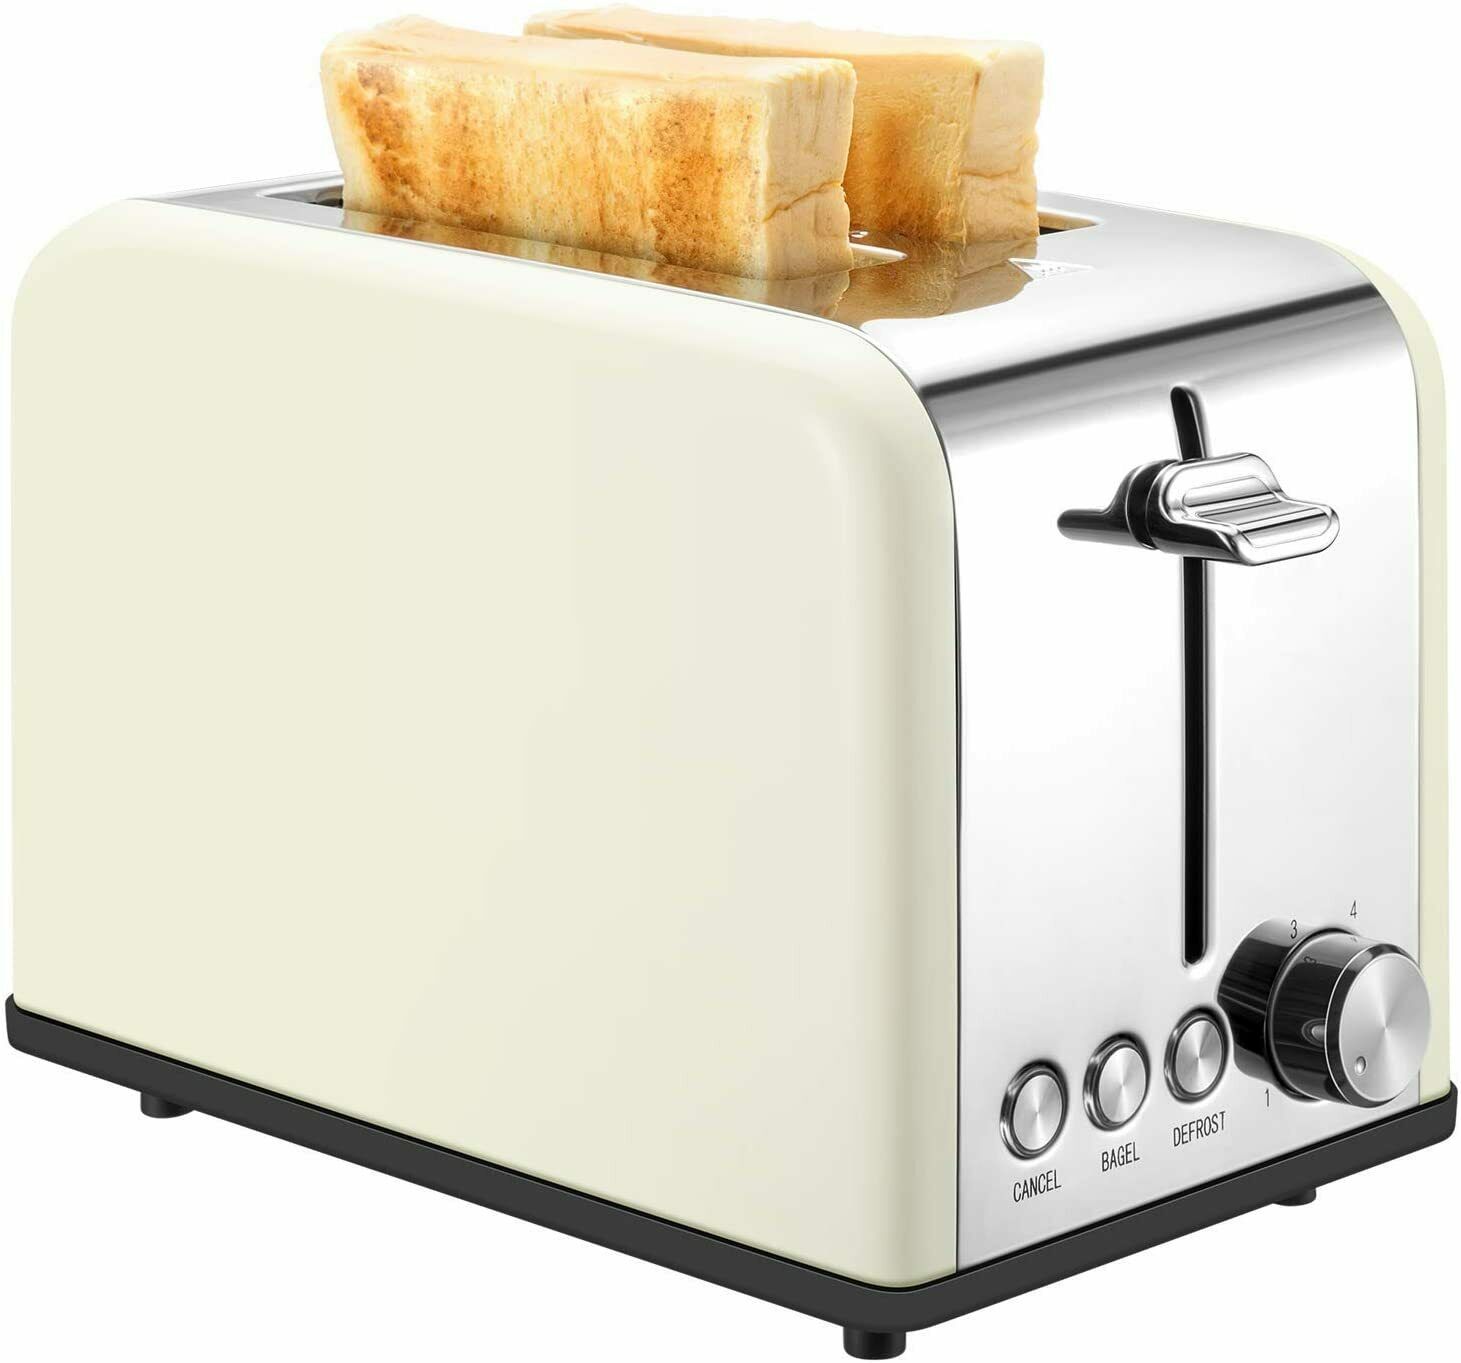 Retro Small Toaster 2 Slice Stainless Steel Bagel, Cancel, Defrost  St003